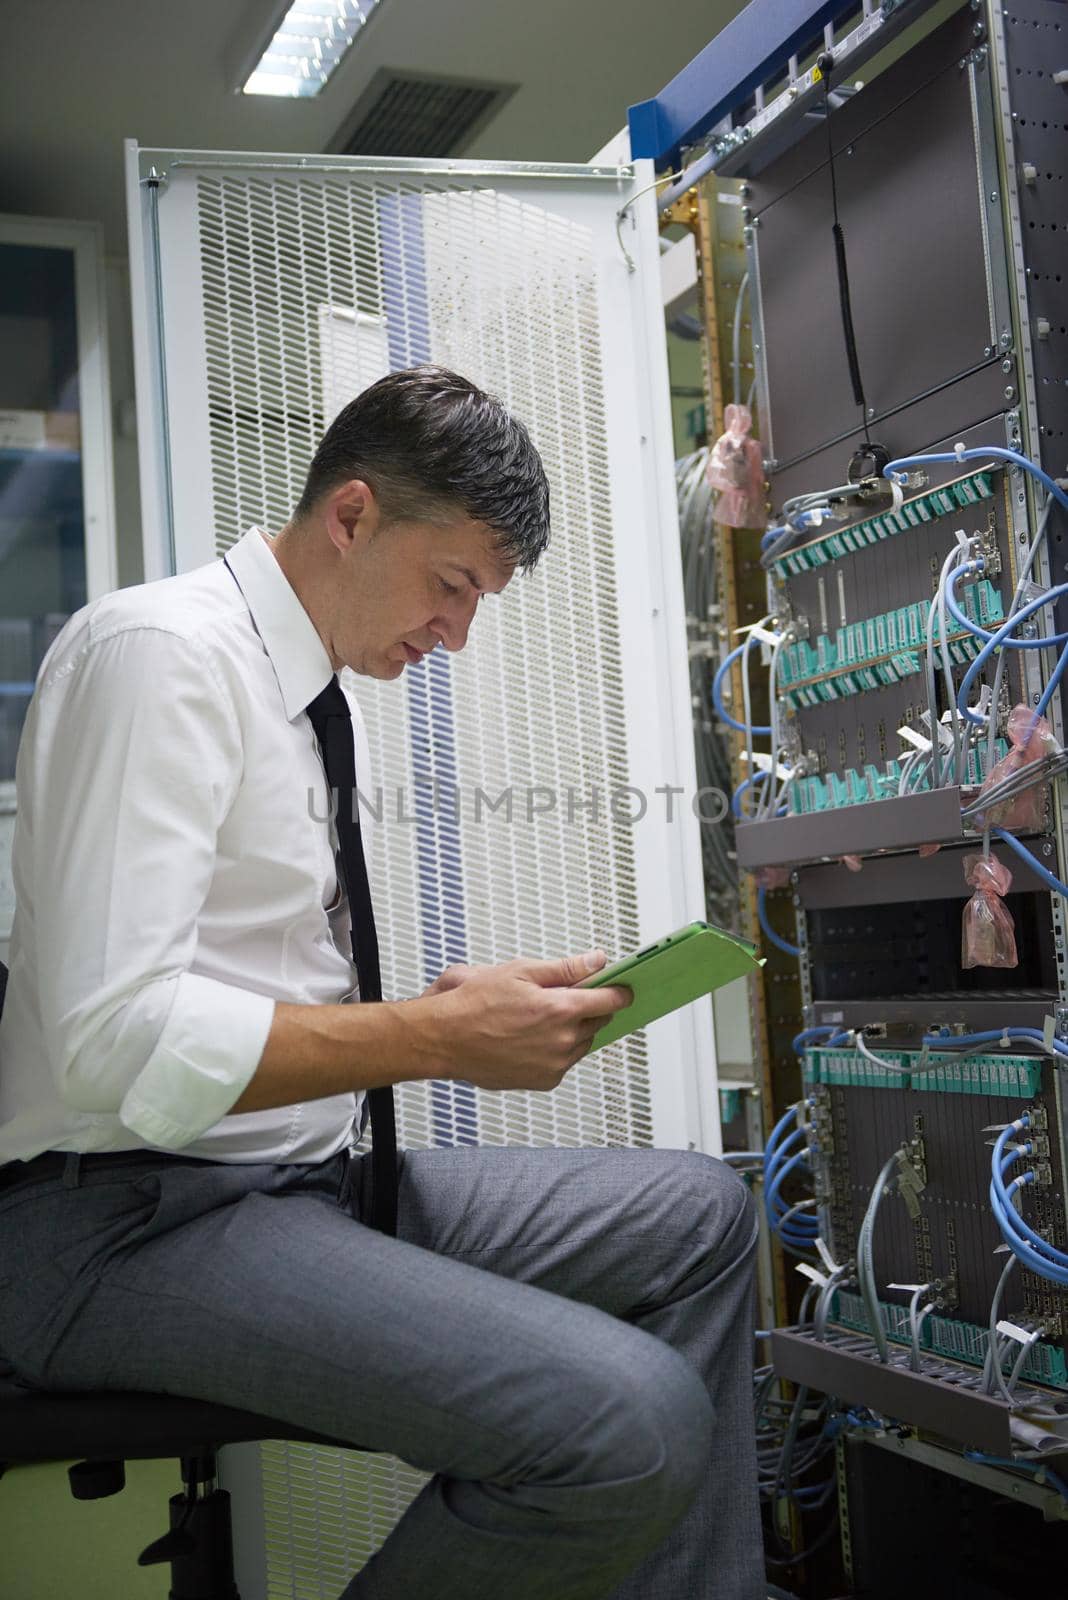 network engineer working in  server room, corporate business man working on tablet computer